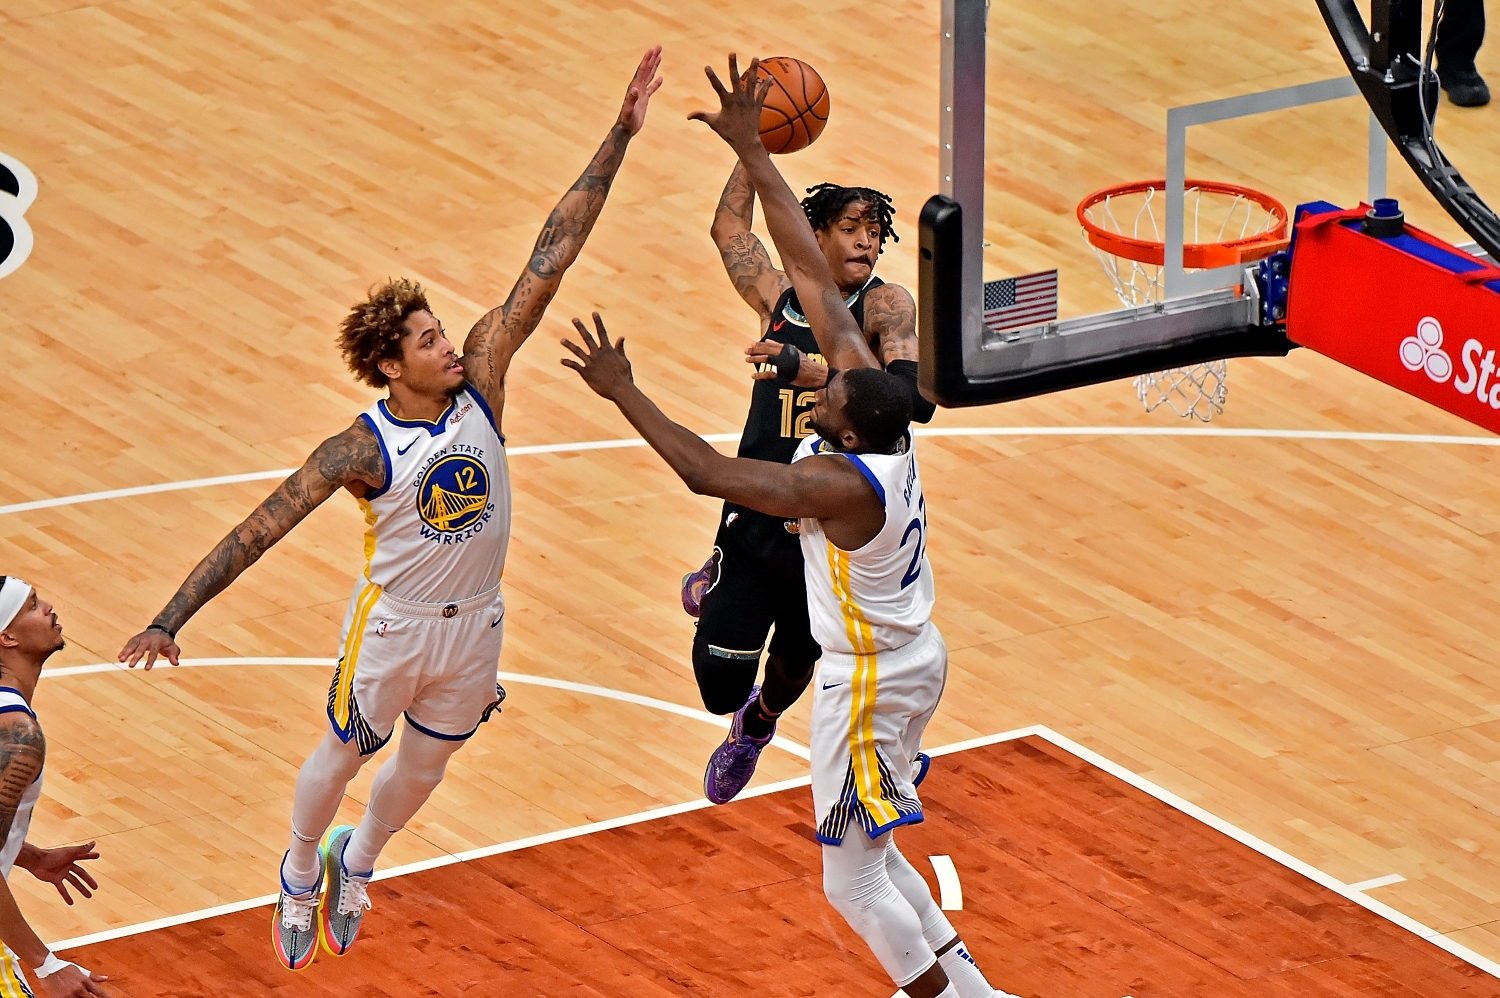 Memphis Grizzlies star Ja Morant dunks over Kelly Oubre Jr. and Draymond Green of the Golden State Warriors in a game on March 19, 2021.